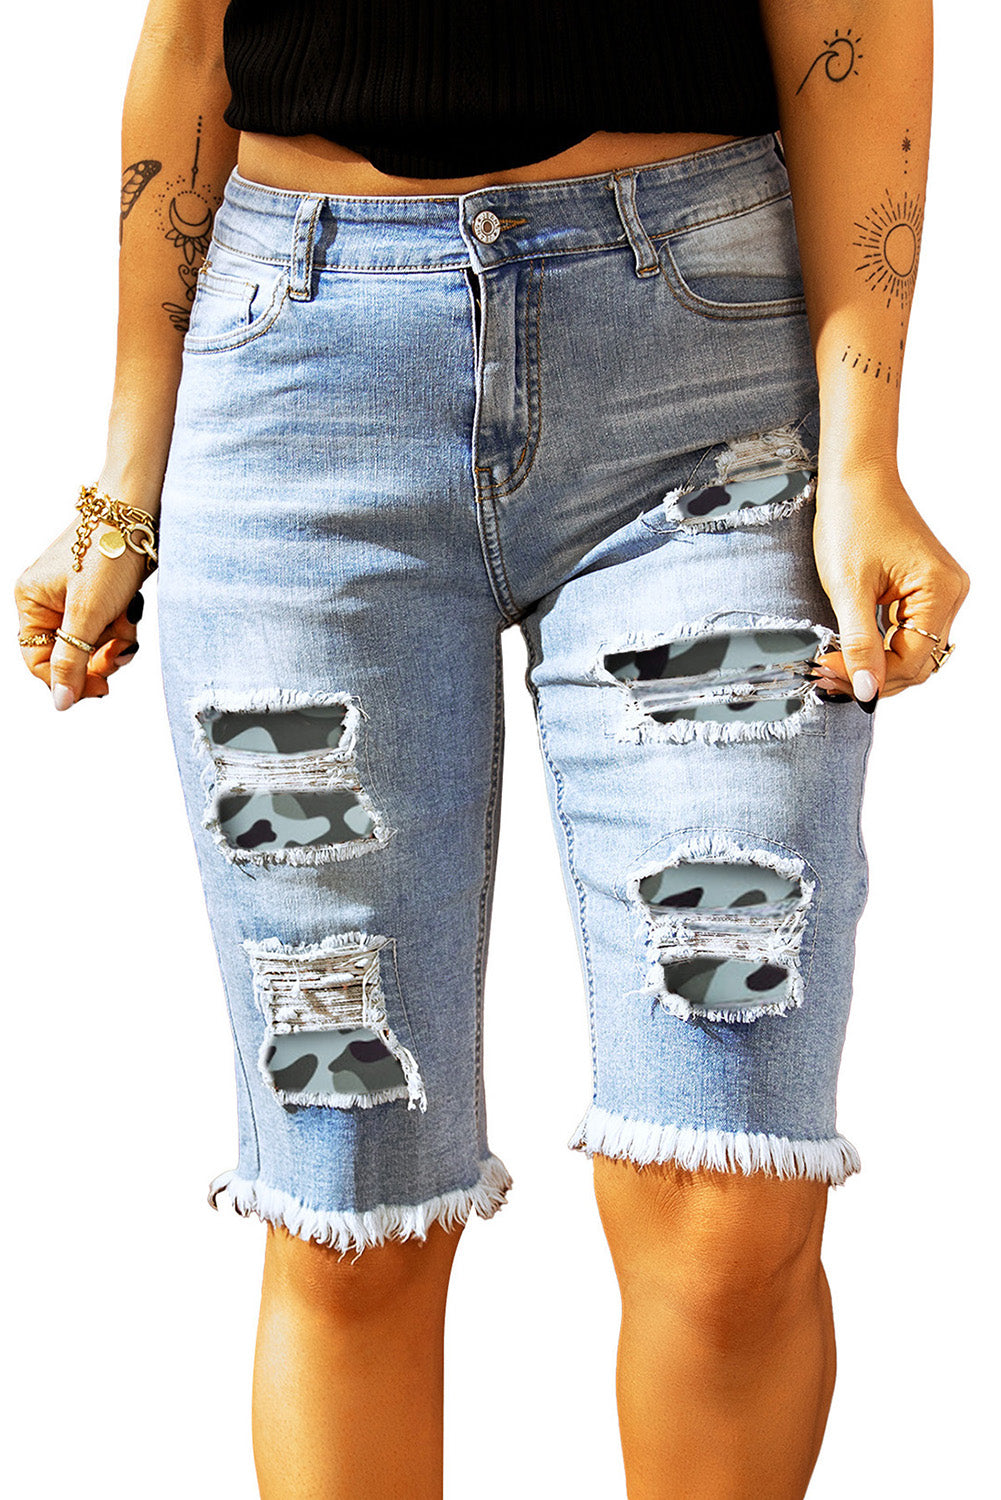 Green Mid Rise Ripped Destroyed Patches Bermuda Shorts Jeans LC781578-9